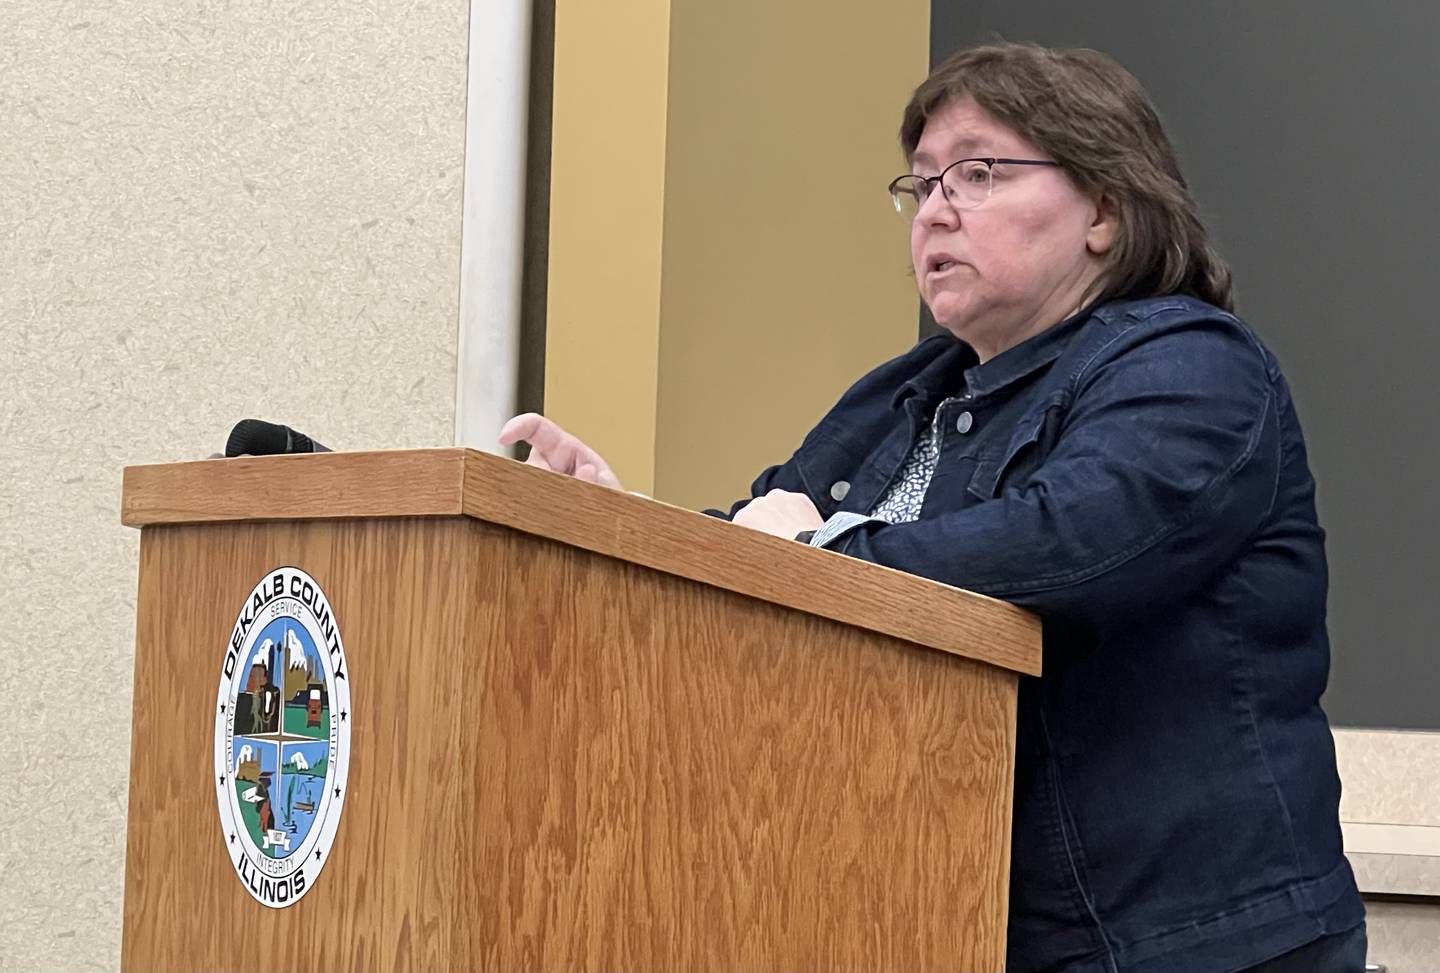 Chief County Assessment Officer Bridget Nodurft gives the 2022 Supervisor of Assessment Annual Report to the DeKalb County Board Committee of the Whole on May 10, 2023.